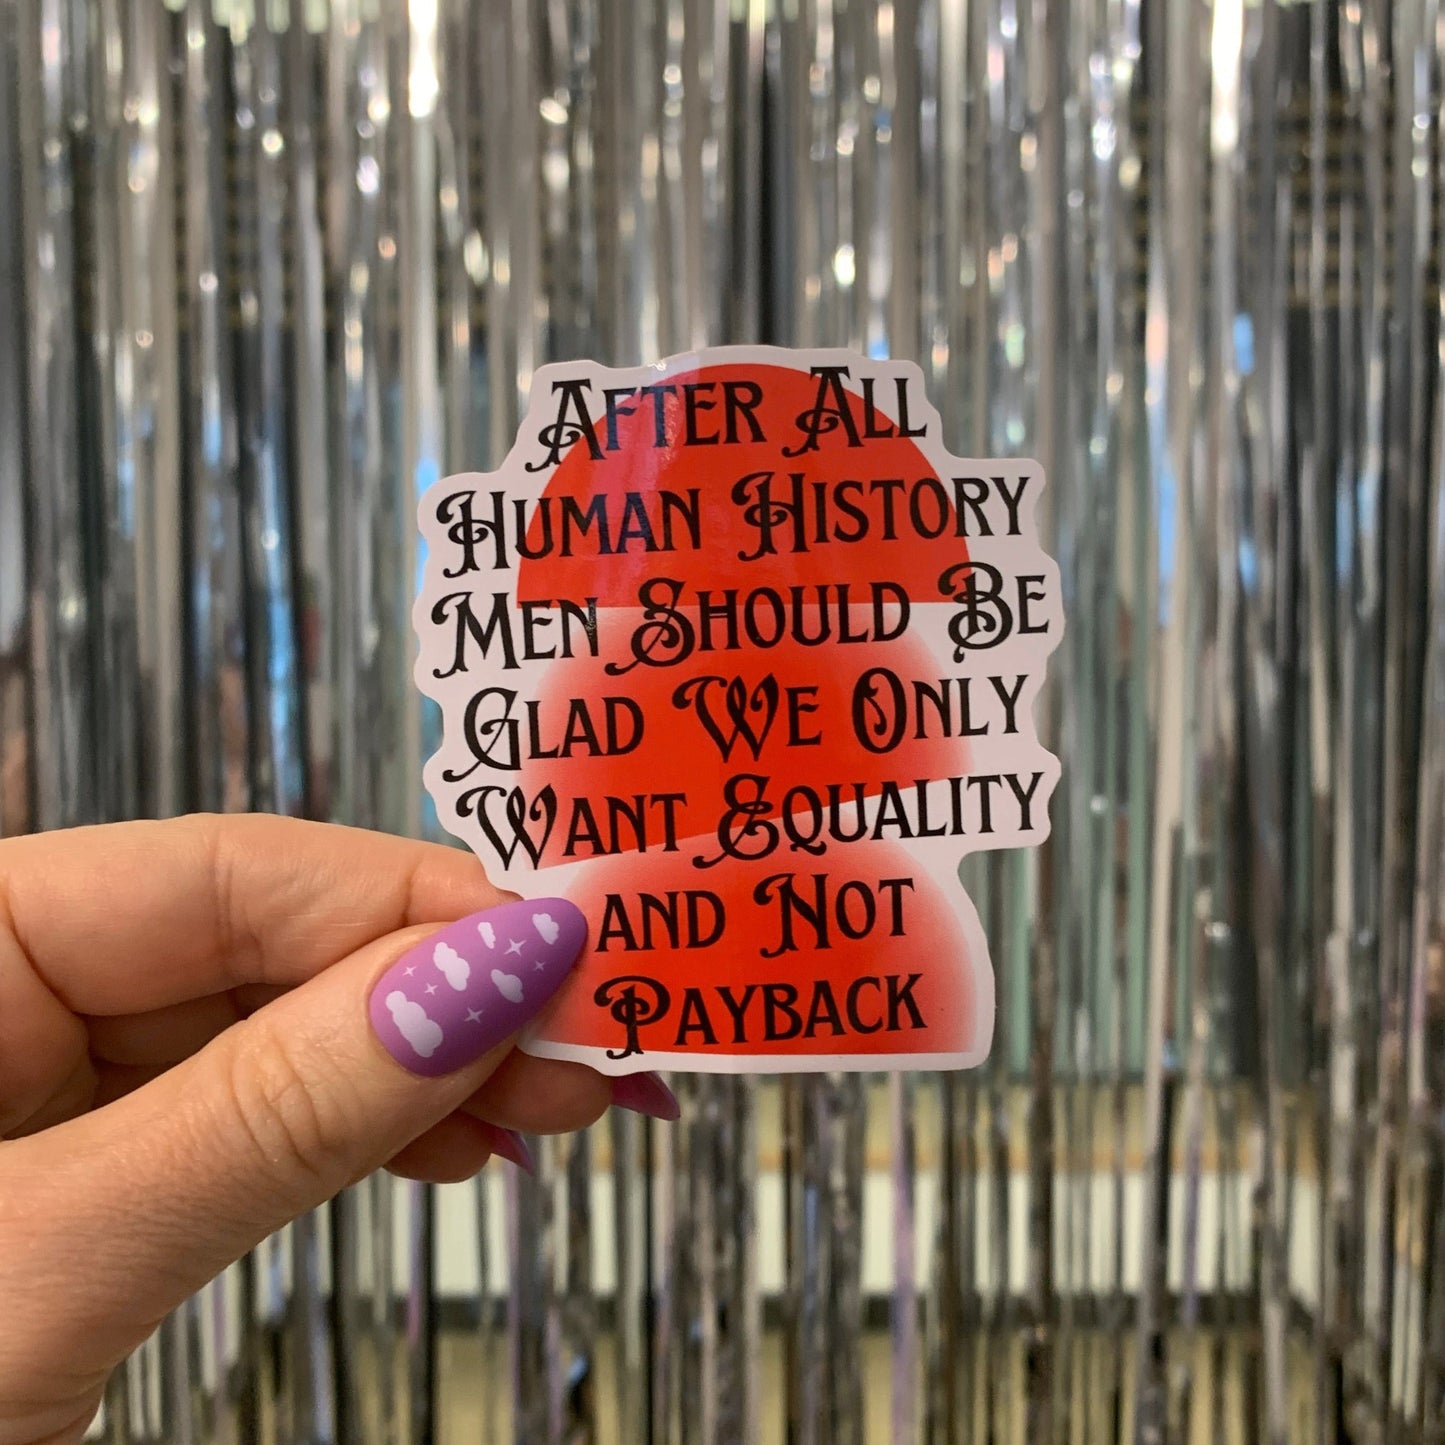 After All Human History Men Should Be Glad We Only Want Equality and Not Payback Glossy Die Cut Feminist Vinyl Sticker 2.67in x 2.95in